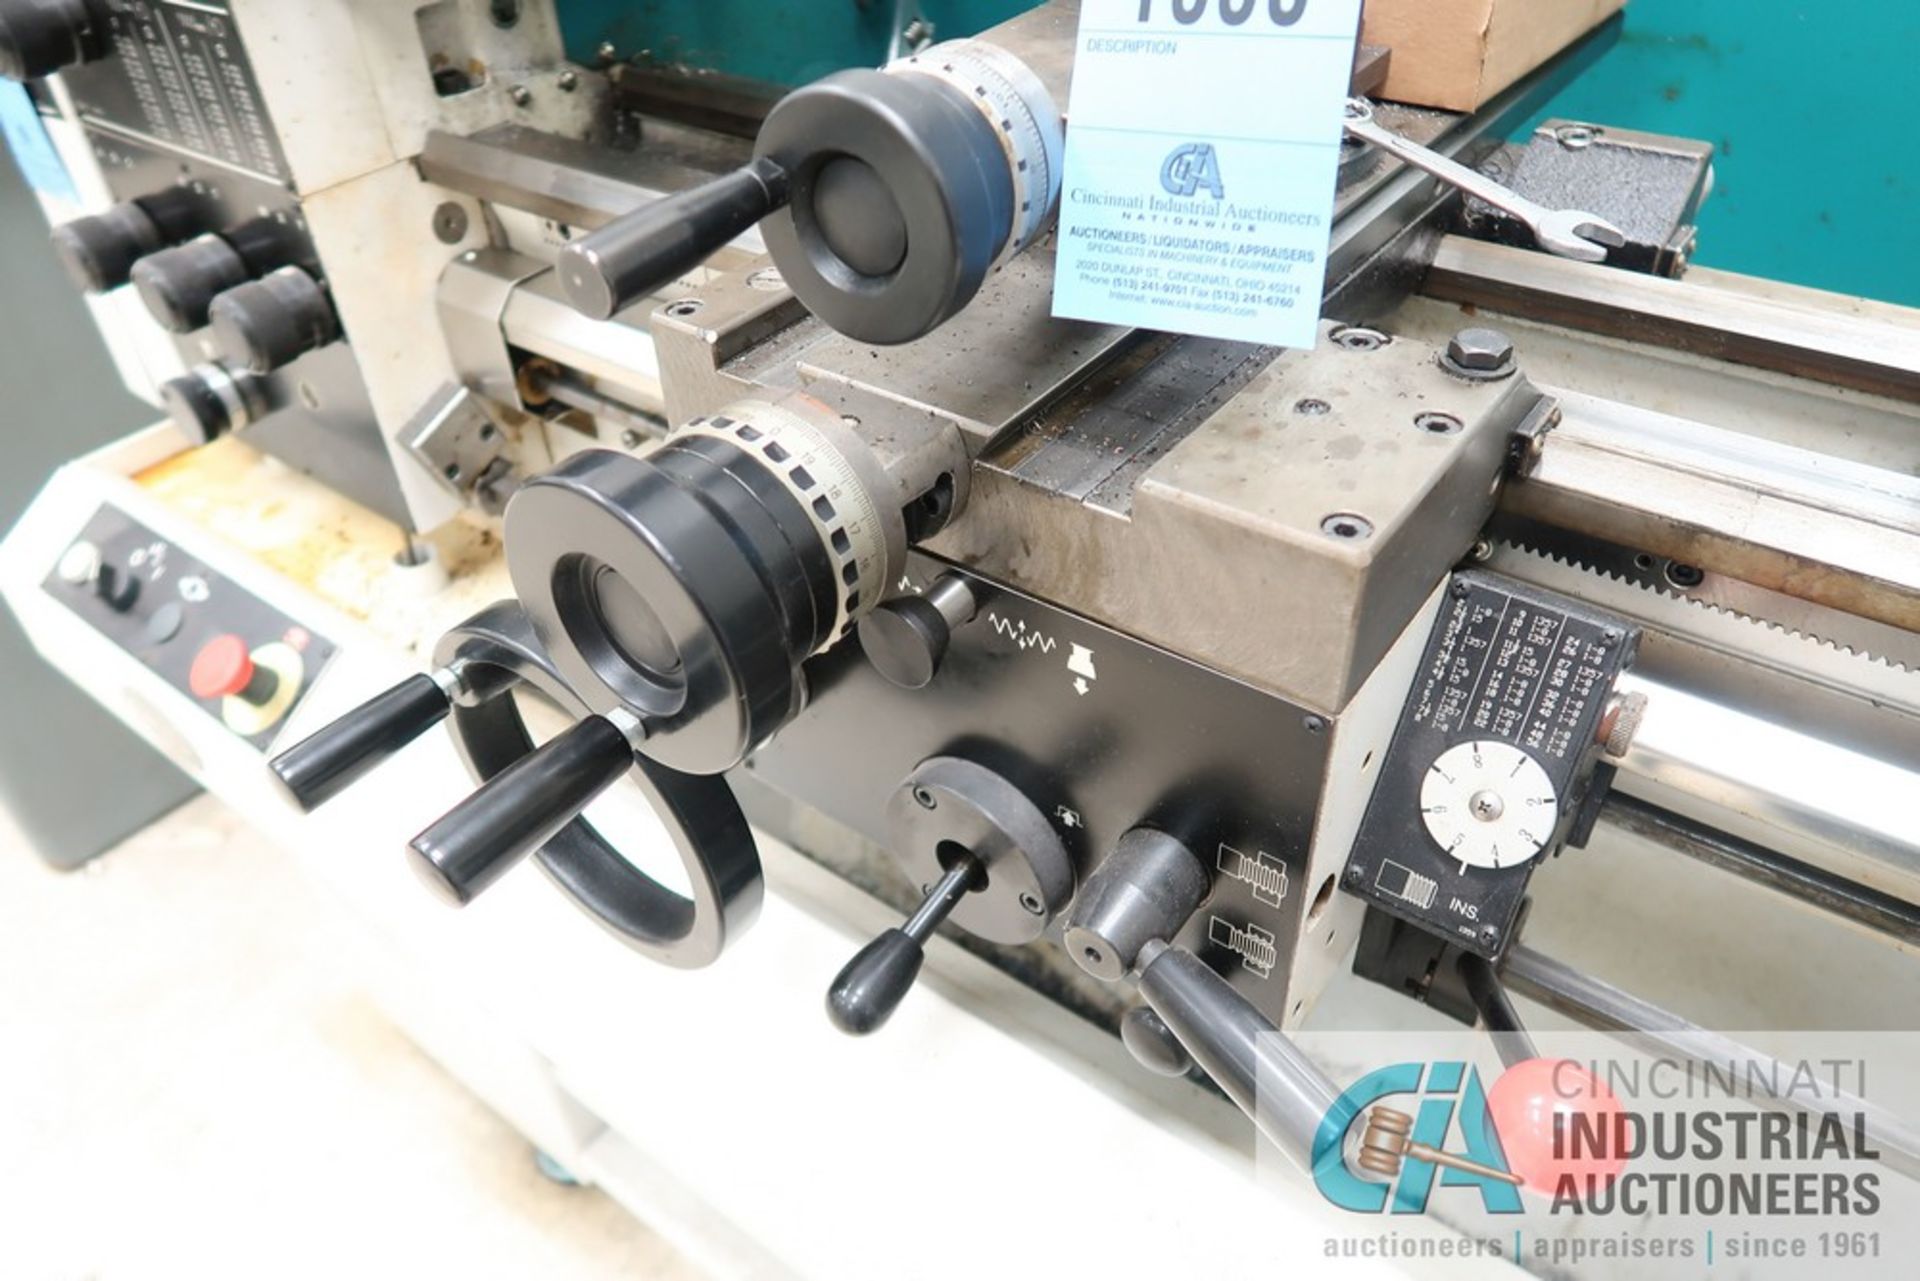 13" X 40" CLAUSING MODEL 8027J GEARED HEAD ENGINE LATHE; S/N NG01496, WITH 6" THREE JAW CHUCK AND - Image 3 of 11